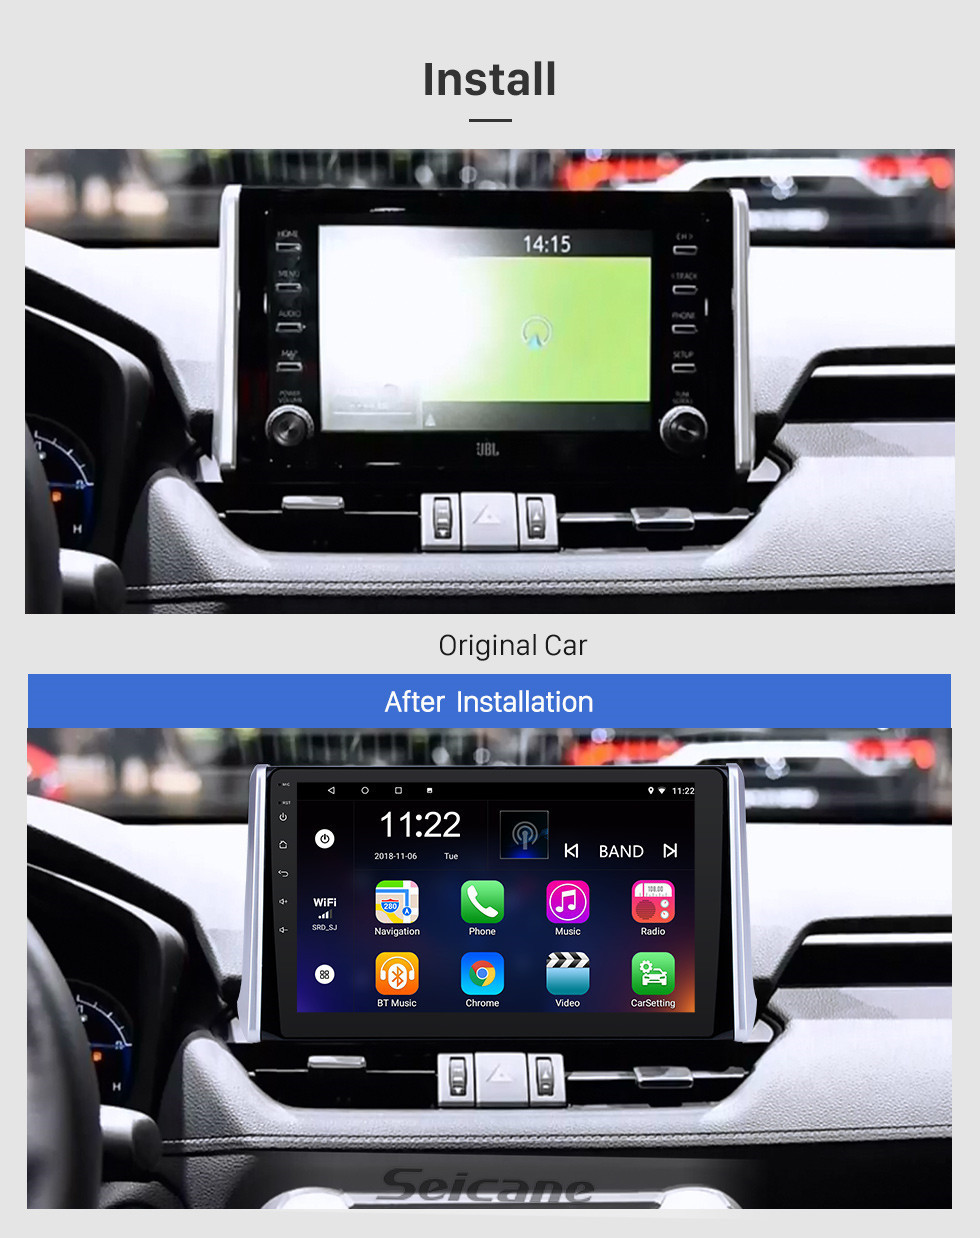 Seicane 10.1 inch Android 13.0 HD Touchscreen GPS Navigation Radio for 2019-2021 Toyota RAV4 with Bluetooth USB WIFI AUX support Carplay Rear camera OBD TPMS